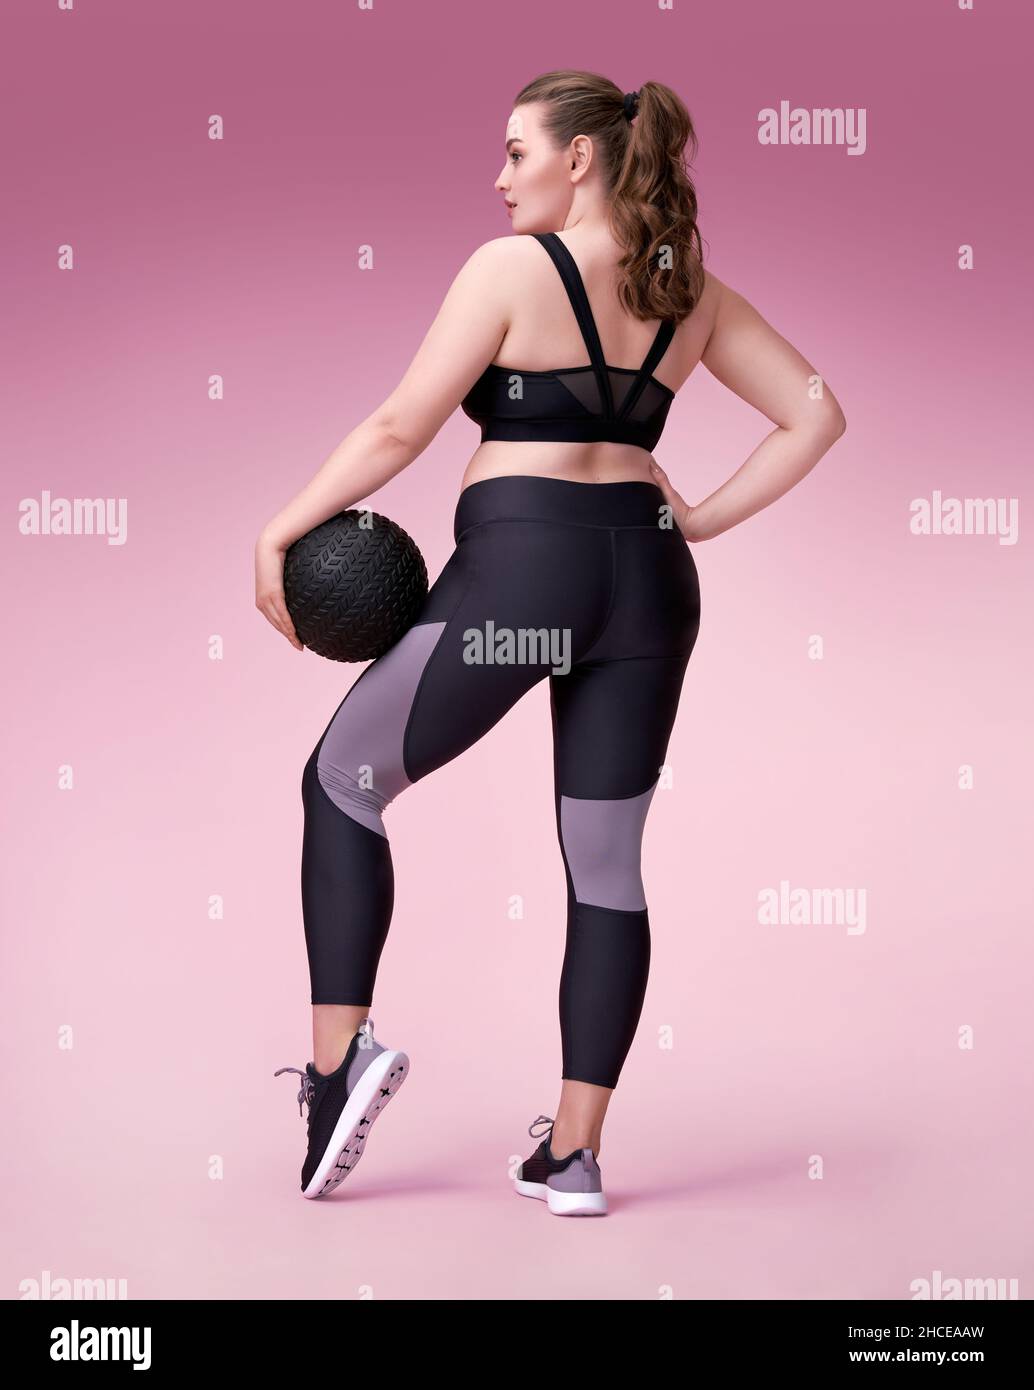 Sporty woman with medicine ball. Photo of model with curvy figure in fashionable sportswear on pink background. Sports motivation and healthy lifestyl Stock Photo